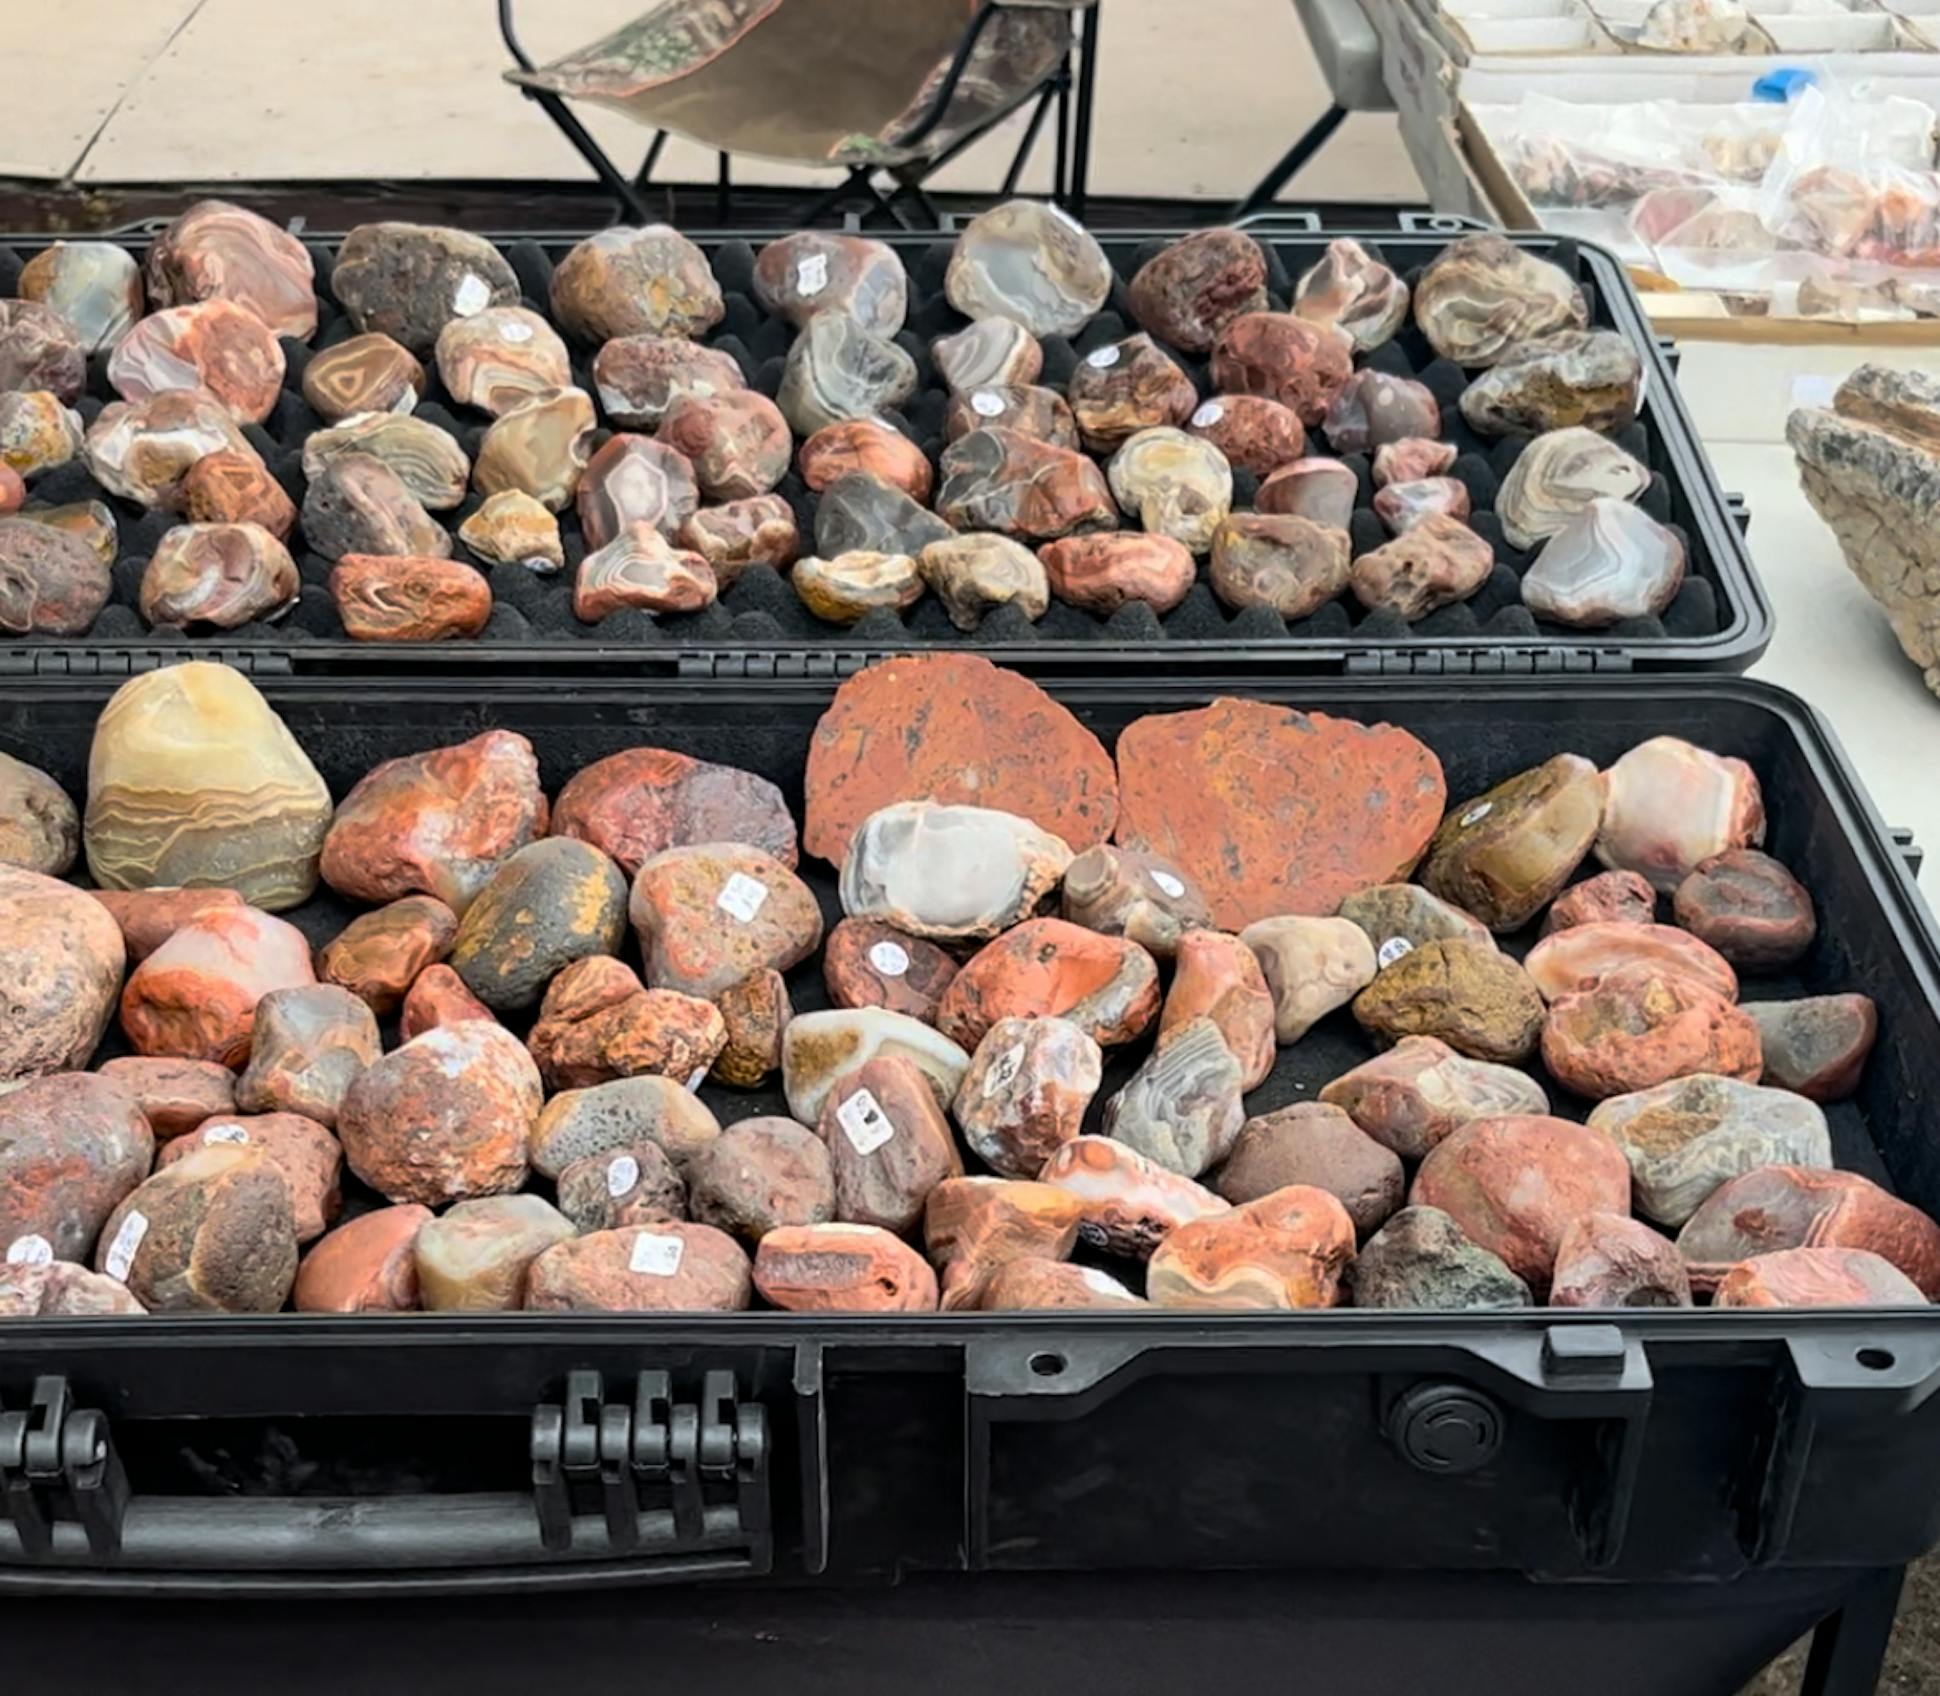 Thousands of agates are for sale at the Agate Days festival in Moose Lake, Minn.